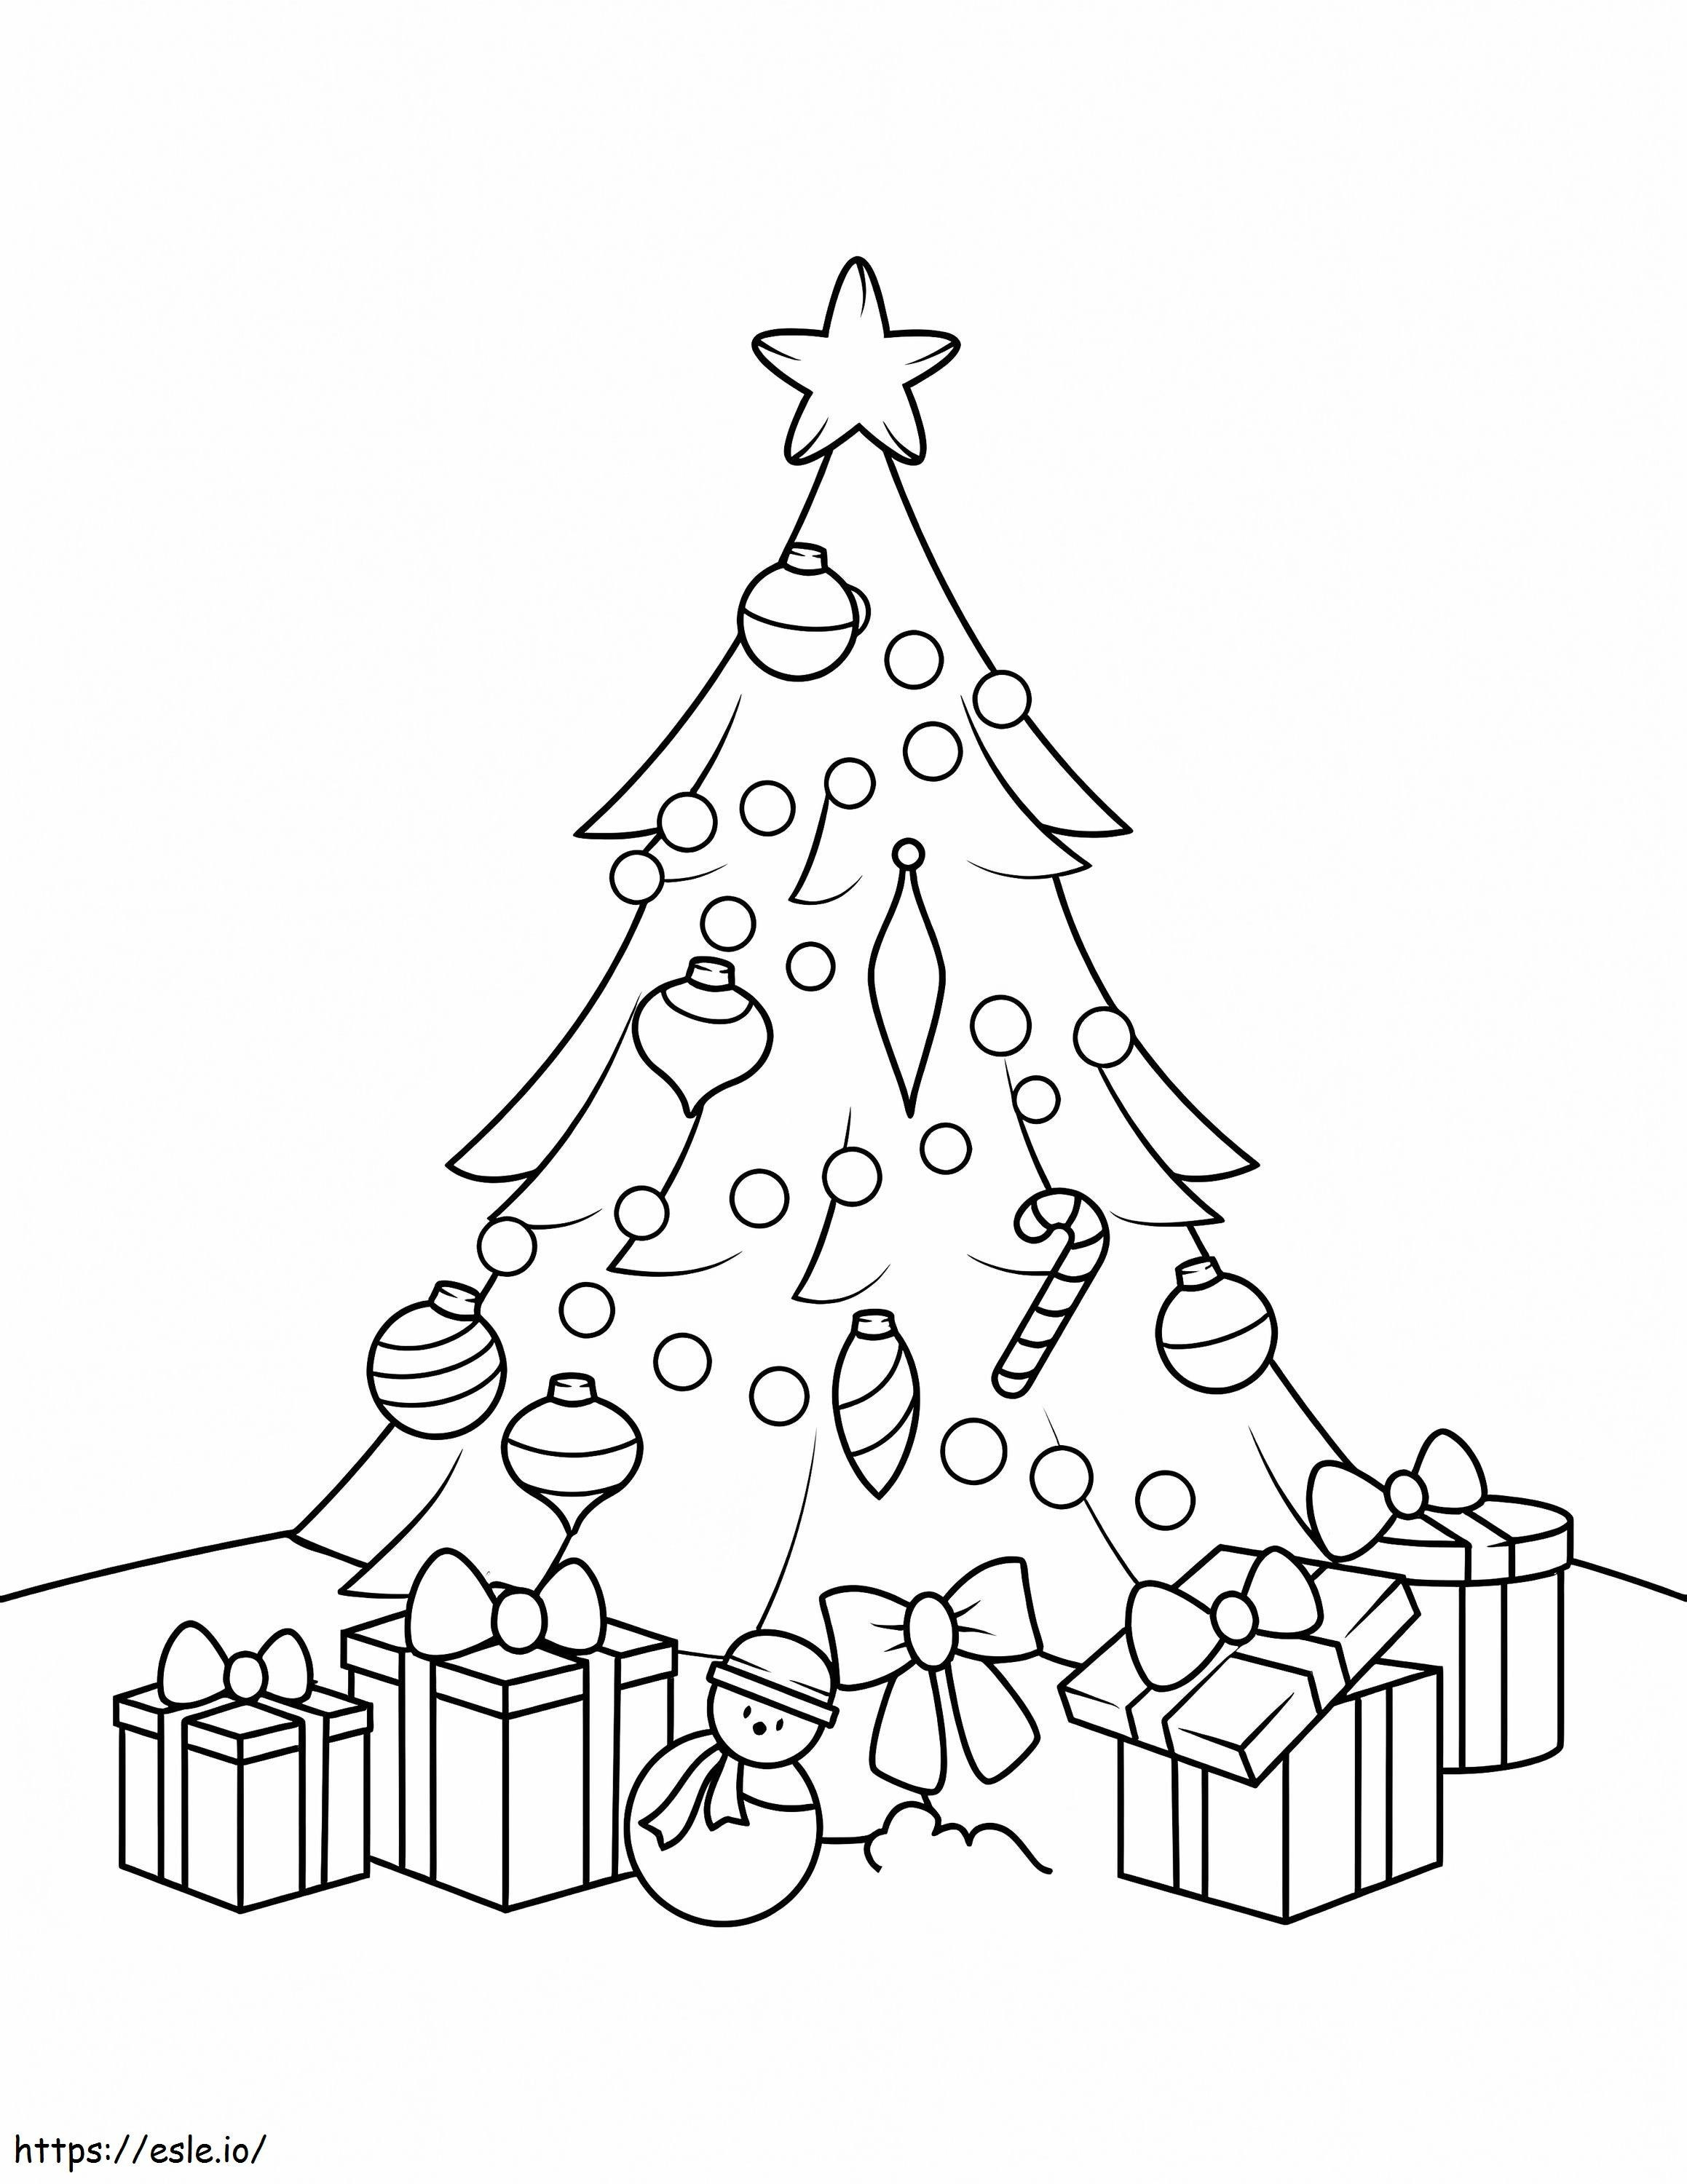 Christmas Tree And Gifts 1 coloring page